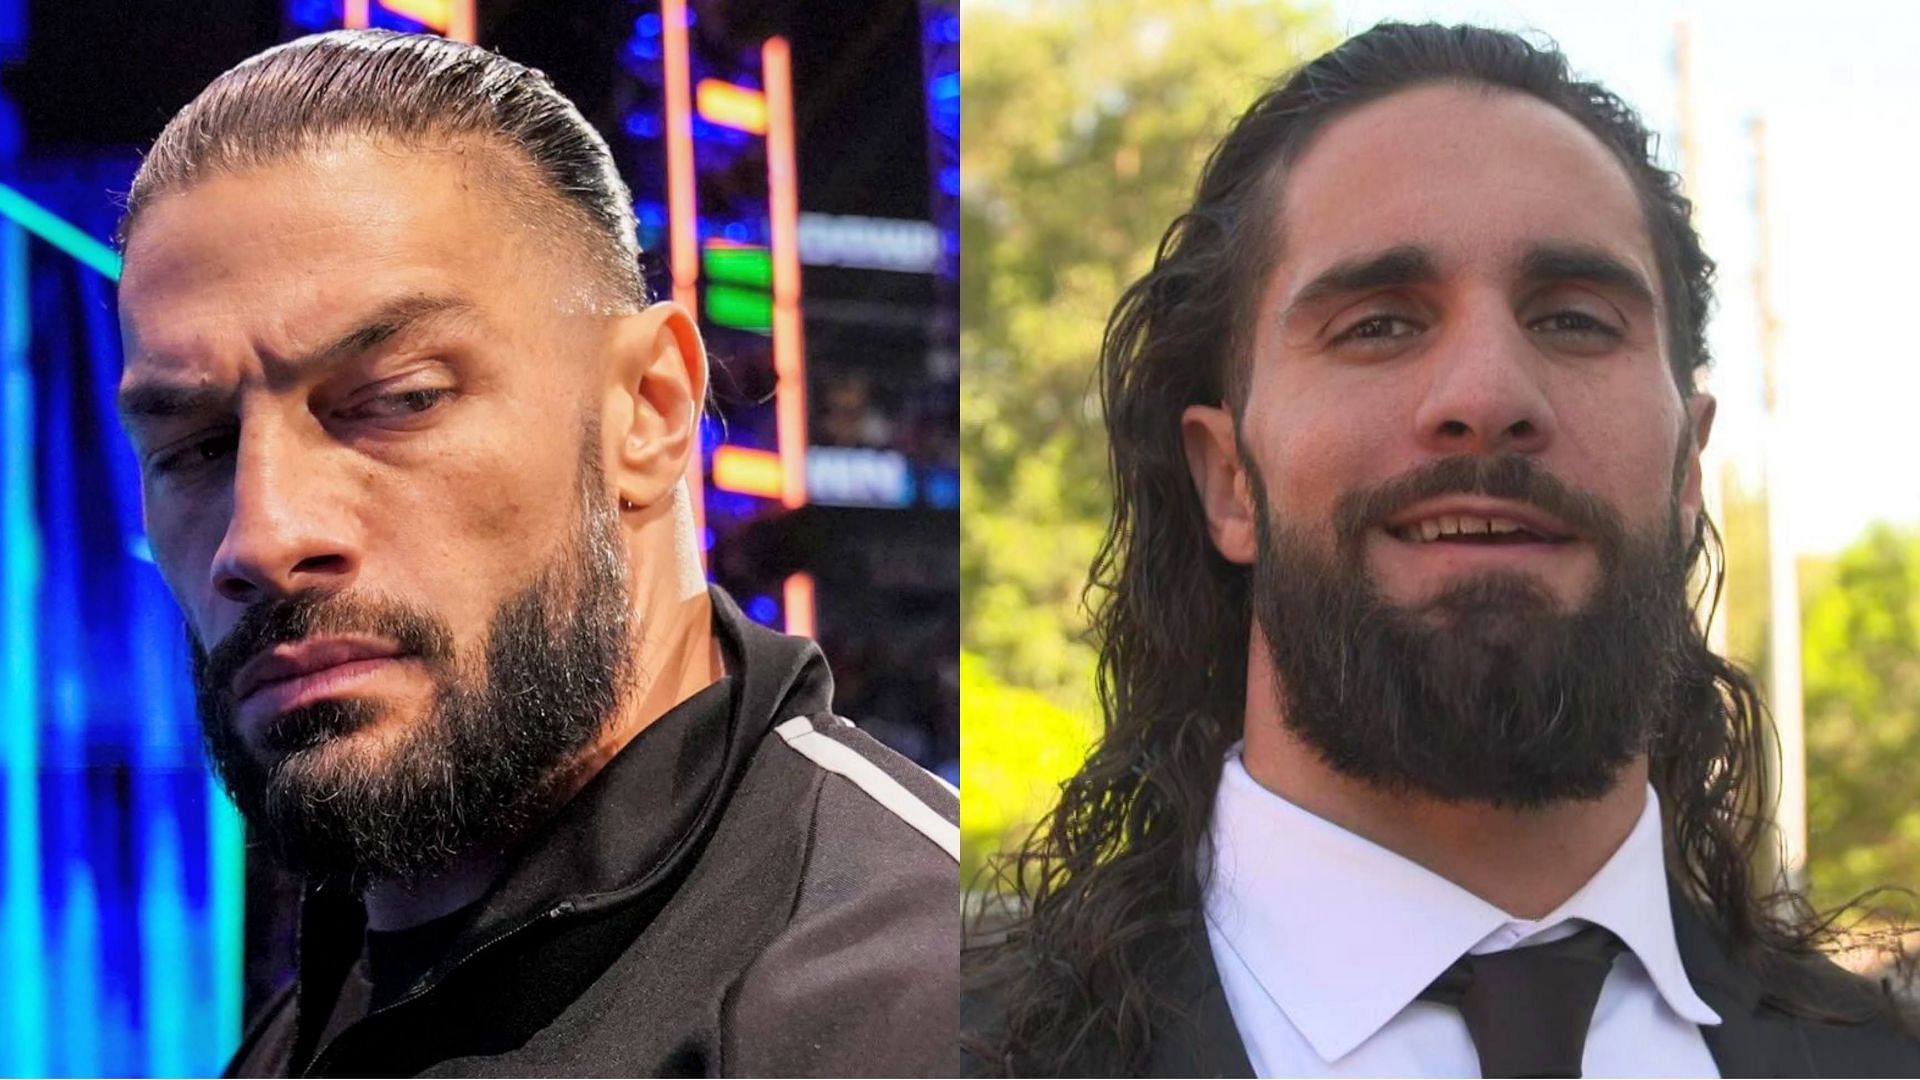 Roman Reigns (left) and Seth Rollins (right)